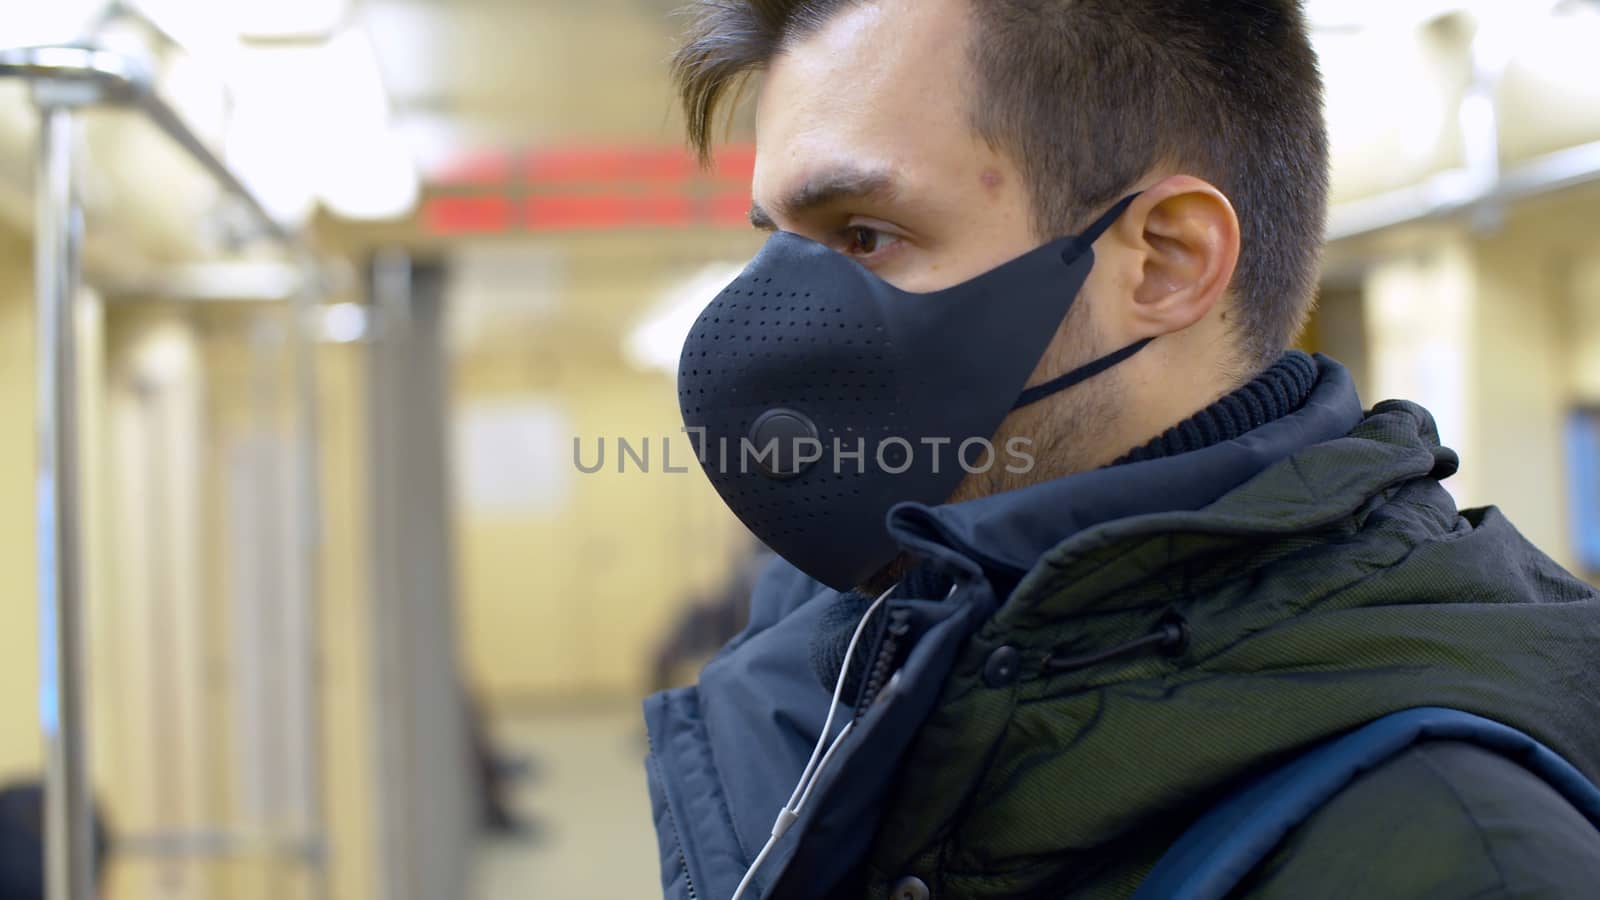 Close up portrait of a young man in reusable protective mask inside subway car. Blurry passengers. Coronavirus epidemic precautions. Healthy lifestyle concept. COVID-19 pandemic